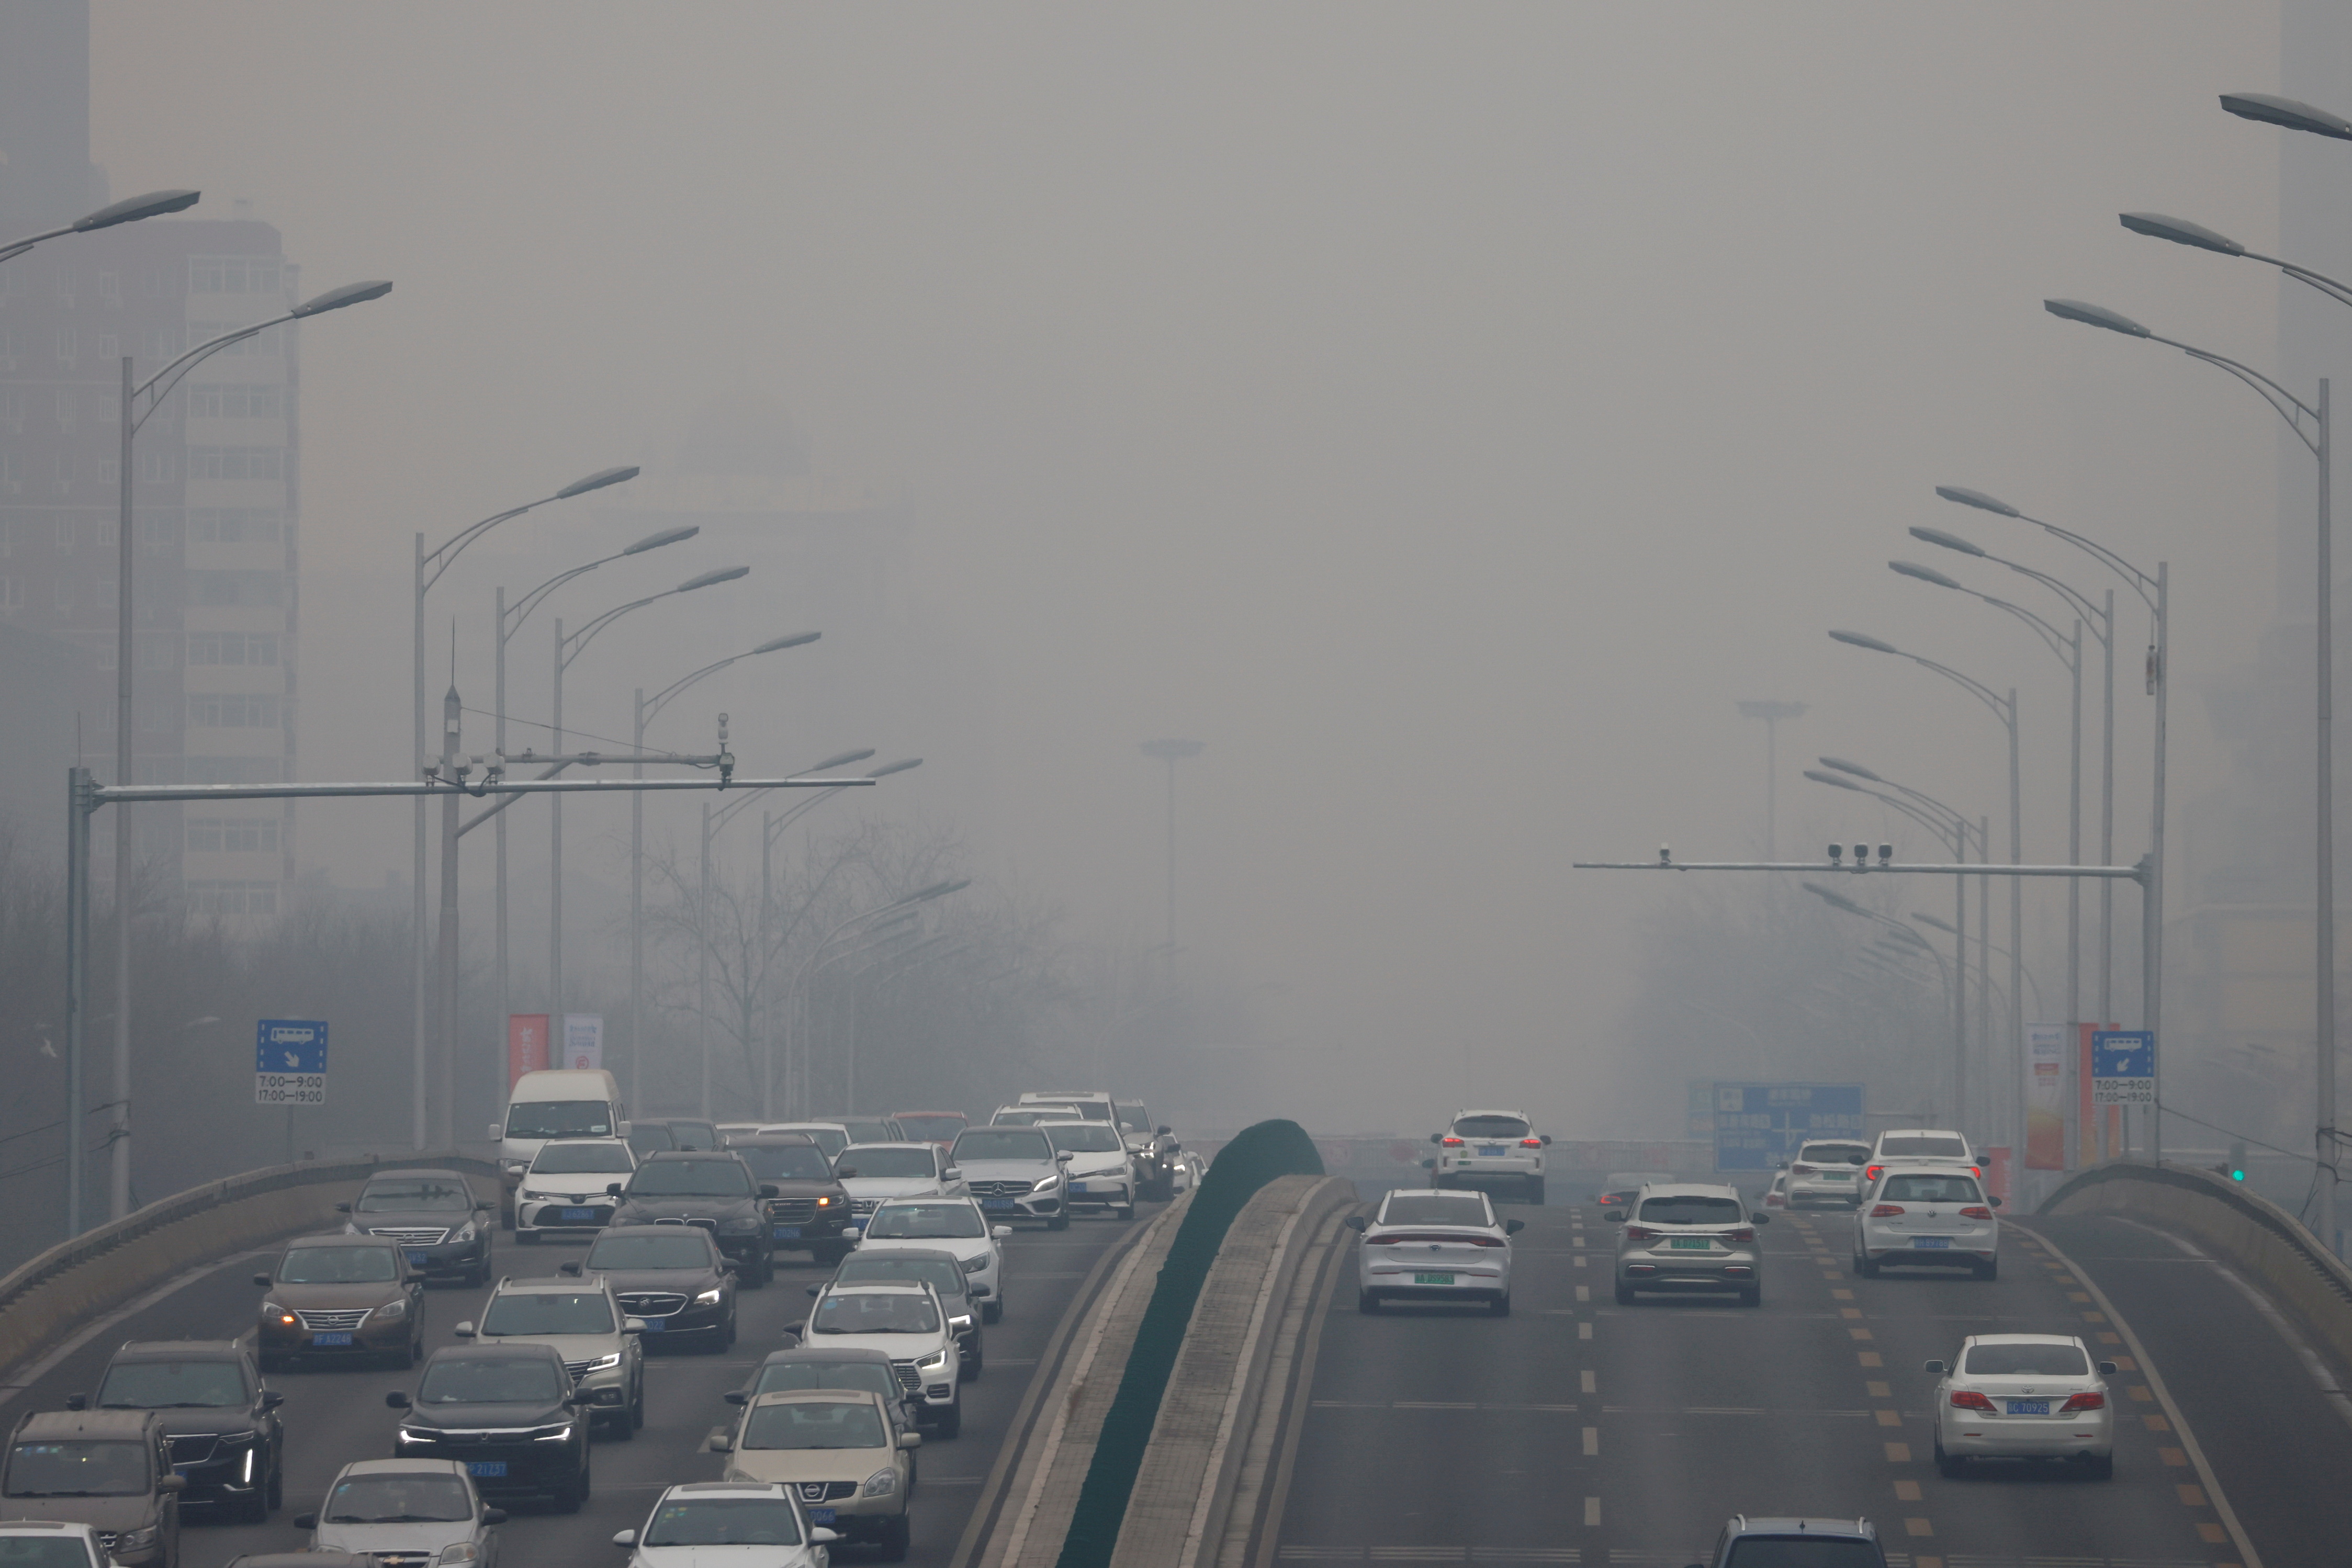 Cars move on a road during a day with polluted air, following the outbreak of the coronavirus disease (COVID-19), in Beijing, China February 13, 2021. REUTERS/Carlos Garcia Rawlins//File Photo